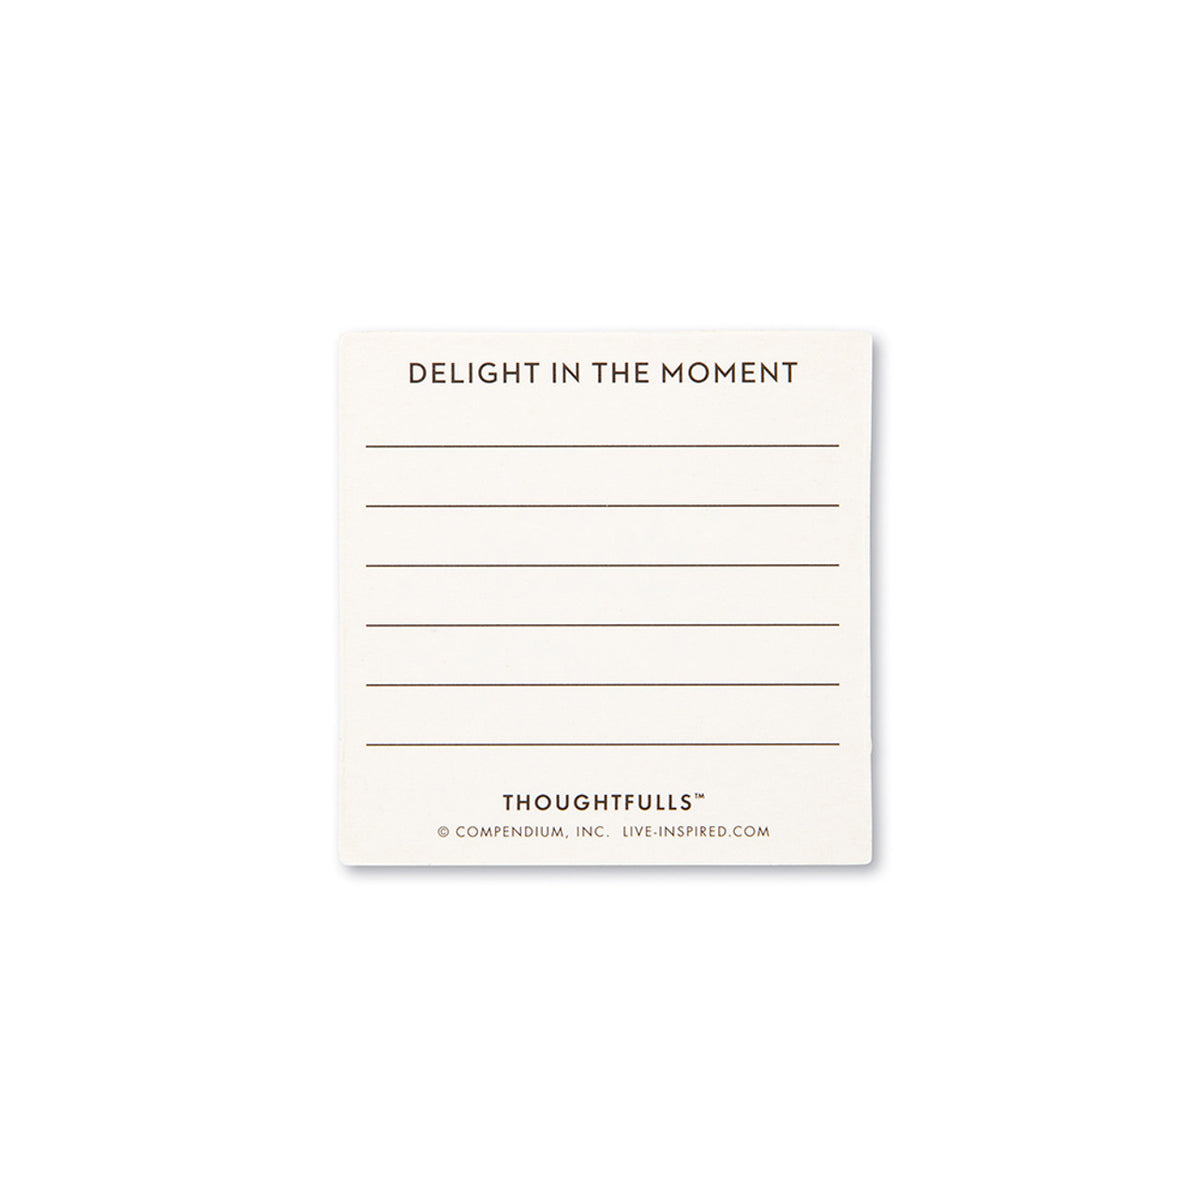 Space for writing personalized message on back of card